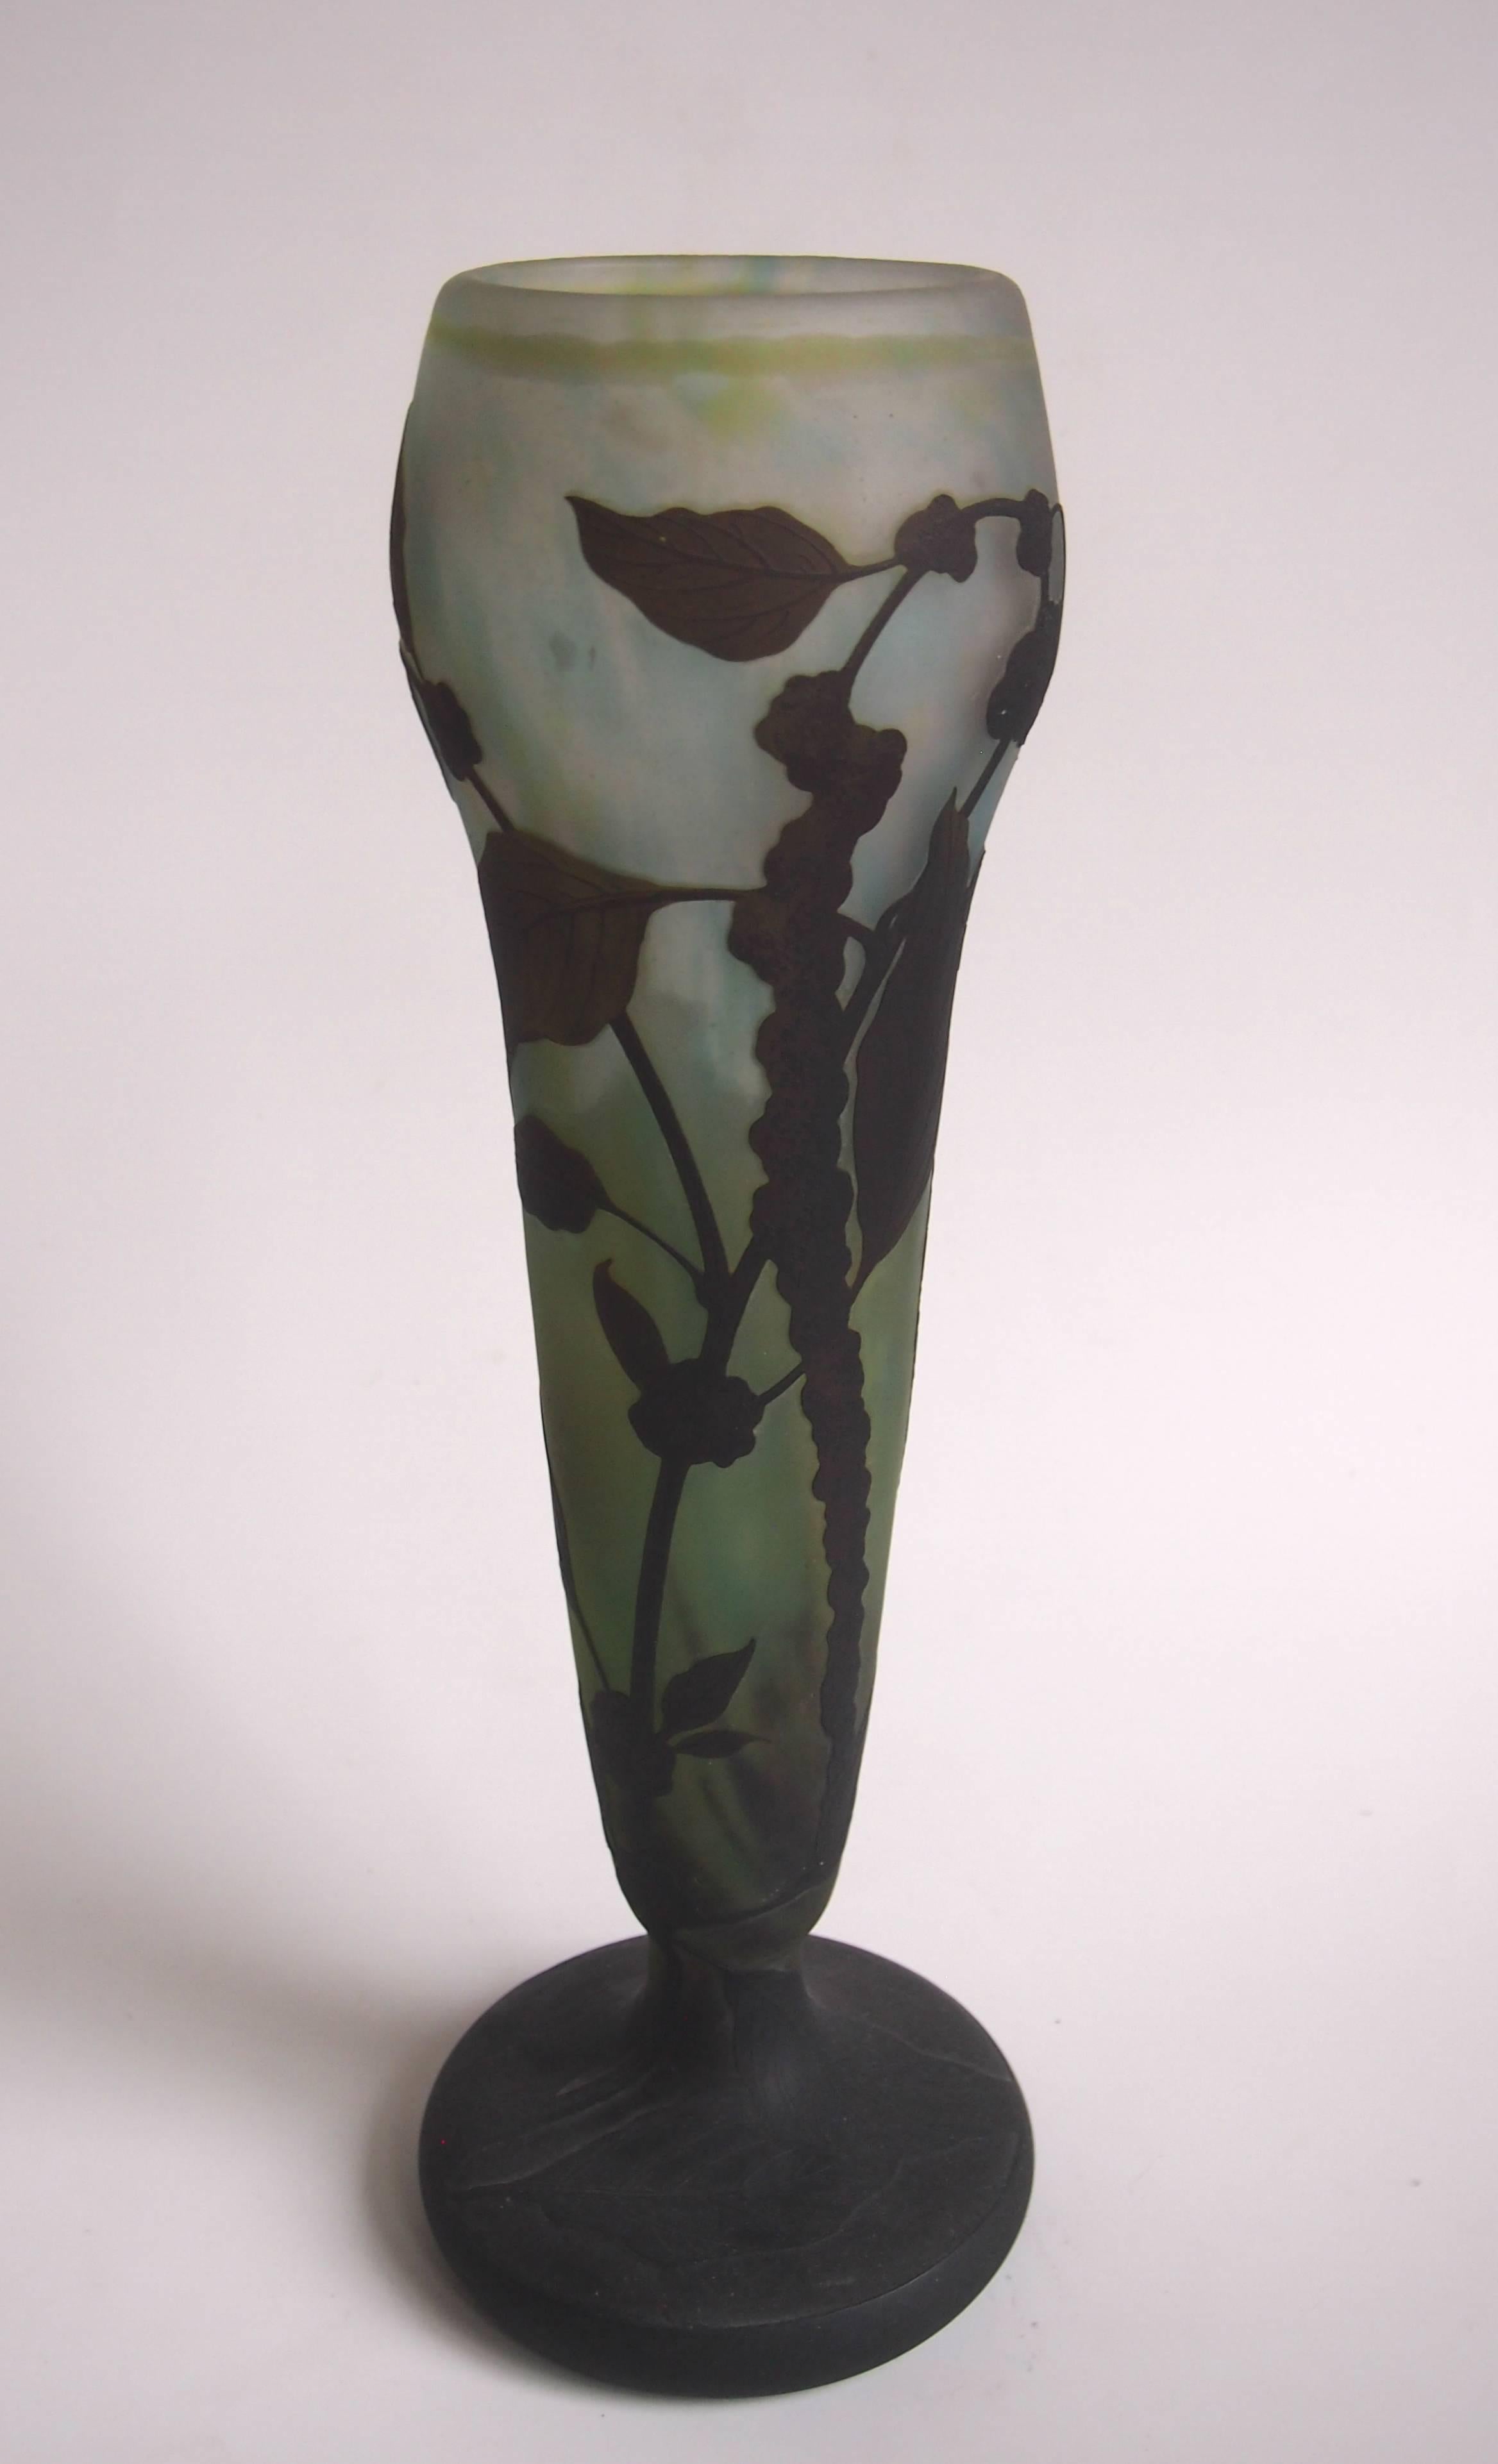 Late 19th Century French Art Nouveau Daum Carved and Cameo Glass Botanical Vase c1900